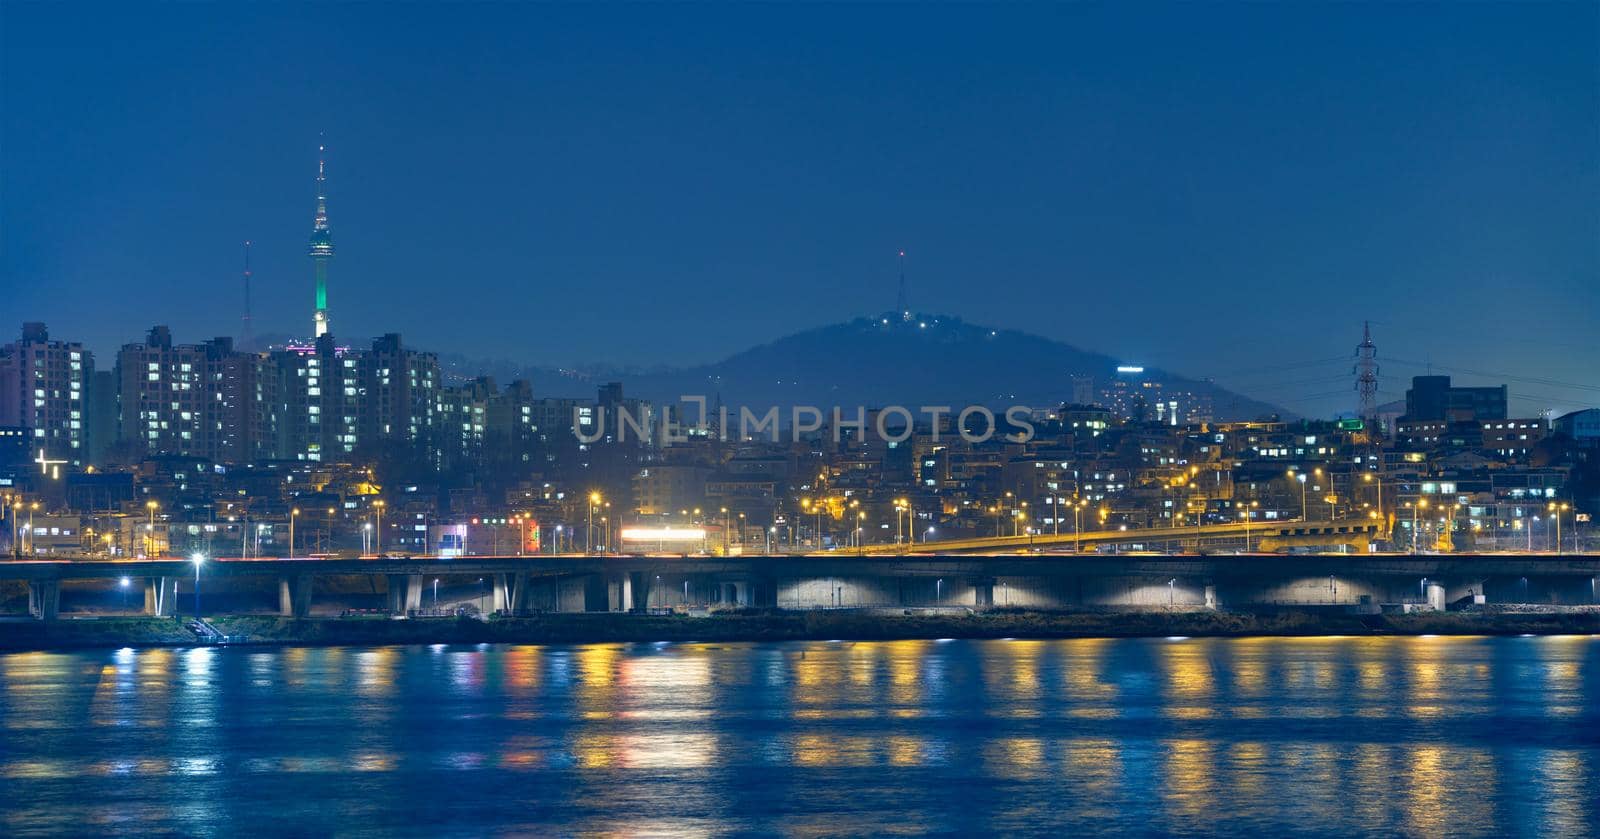 Seoul night view with Namsan Tower over Han River. Seoul, South Korea